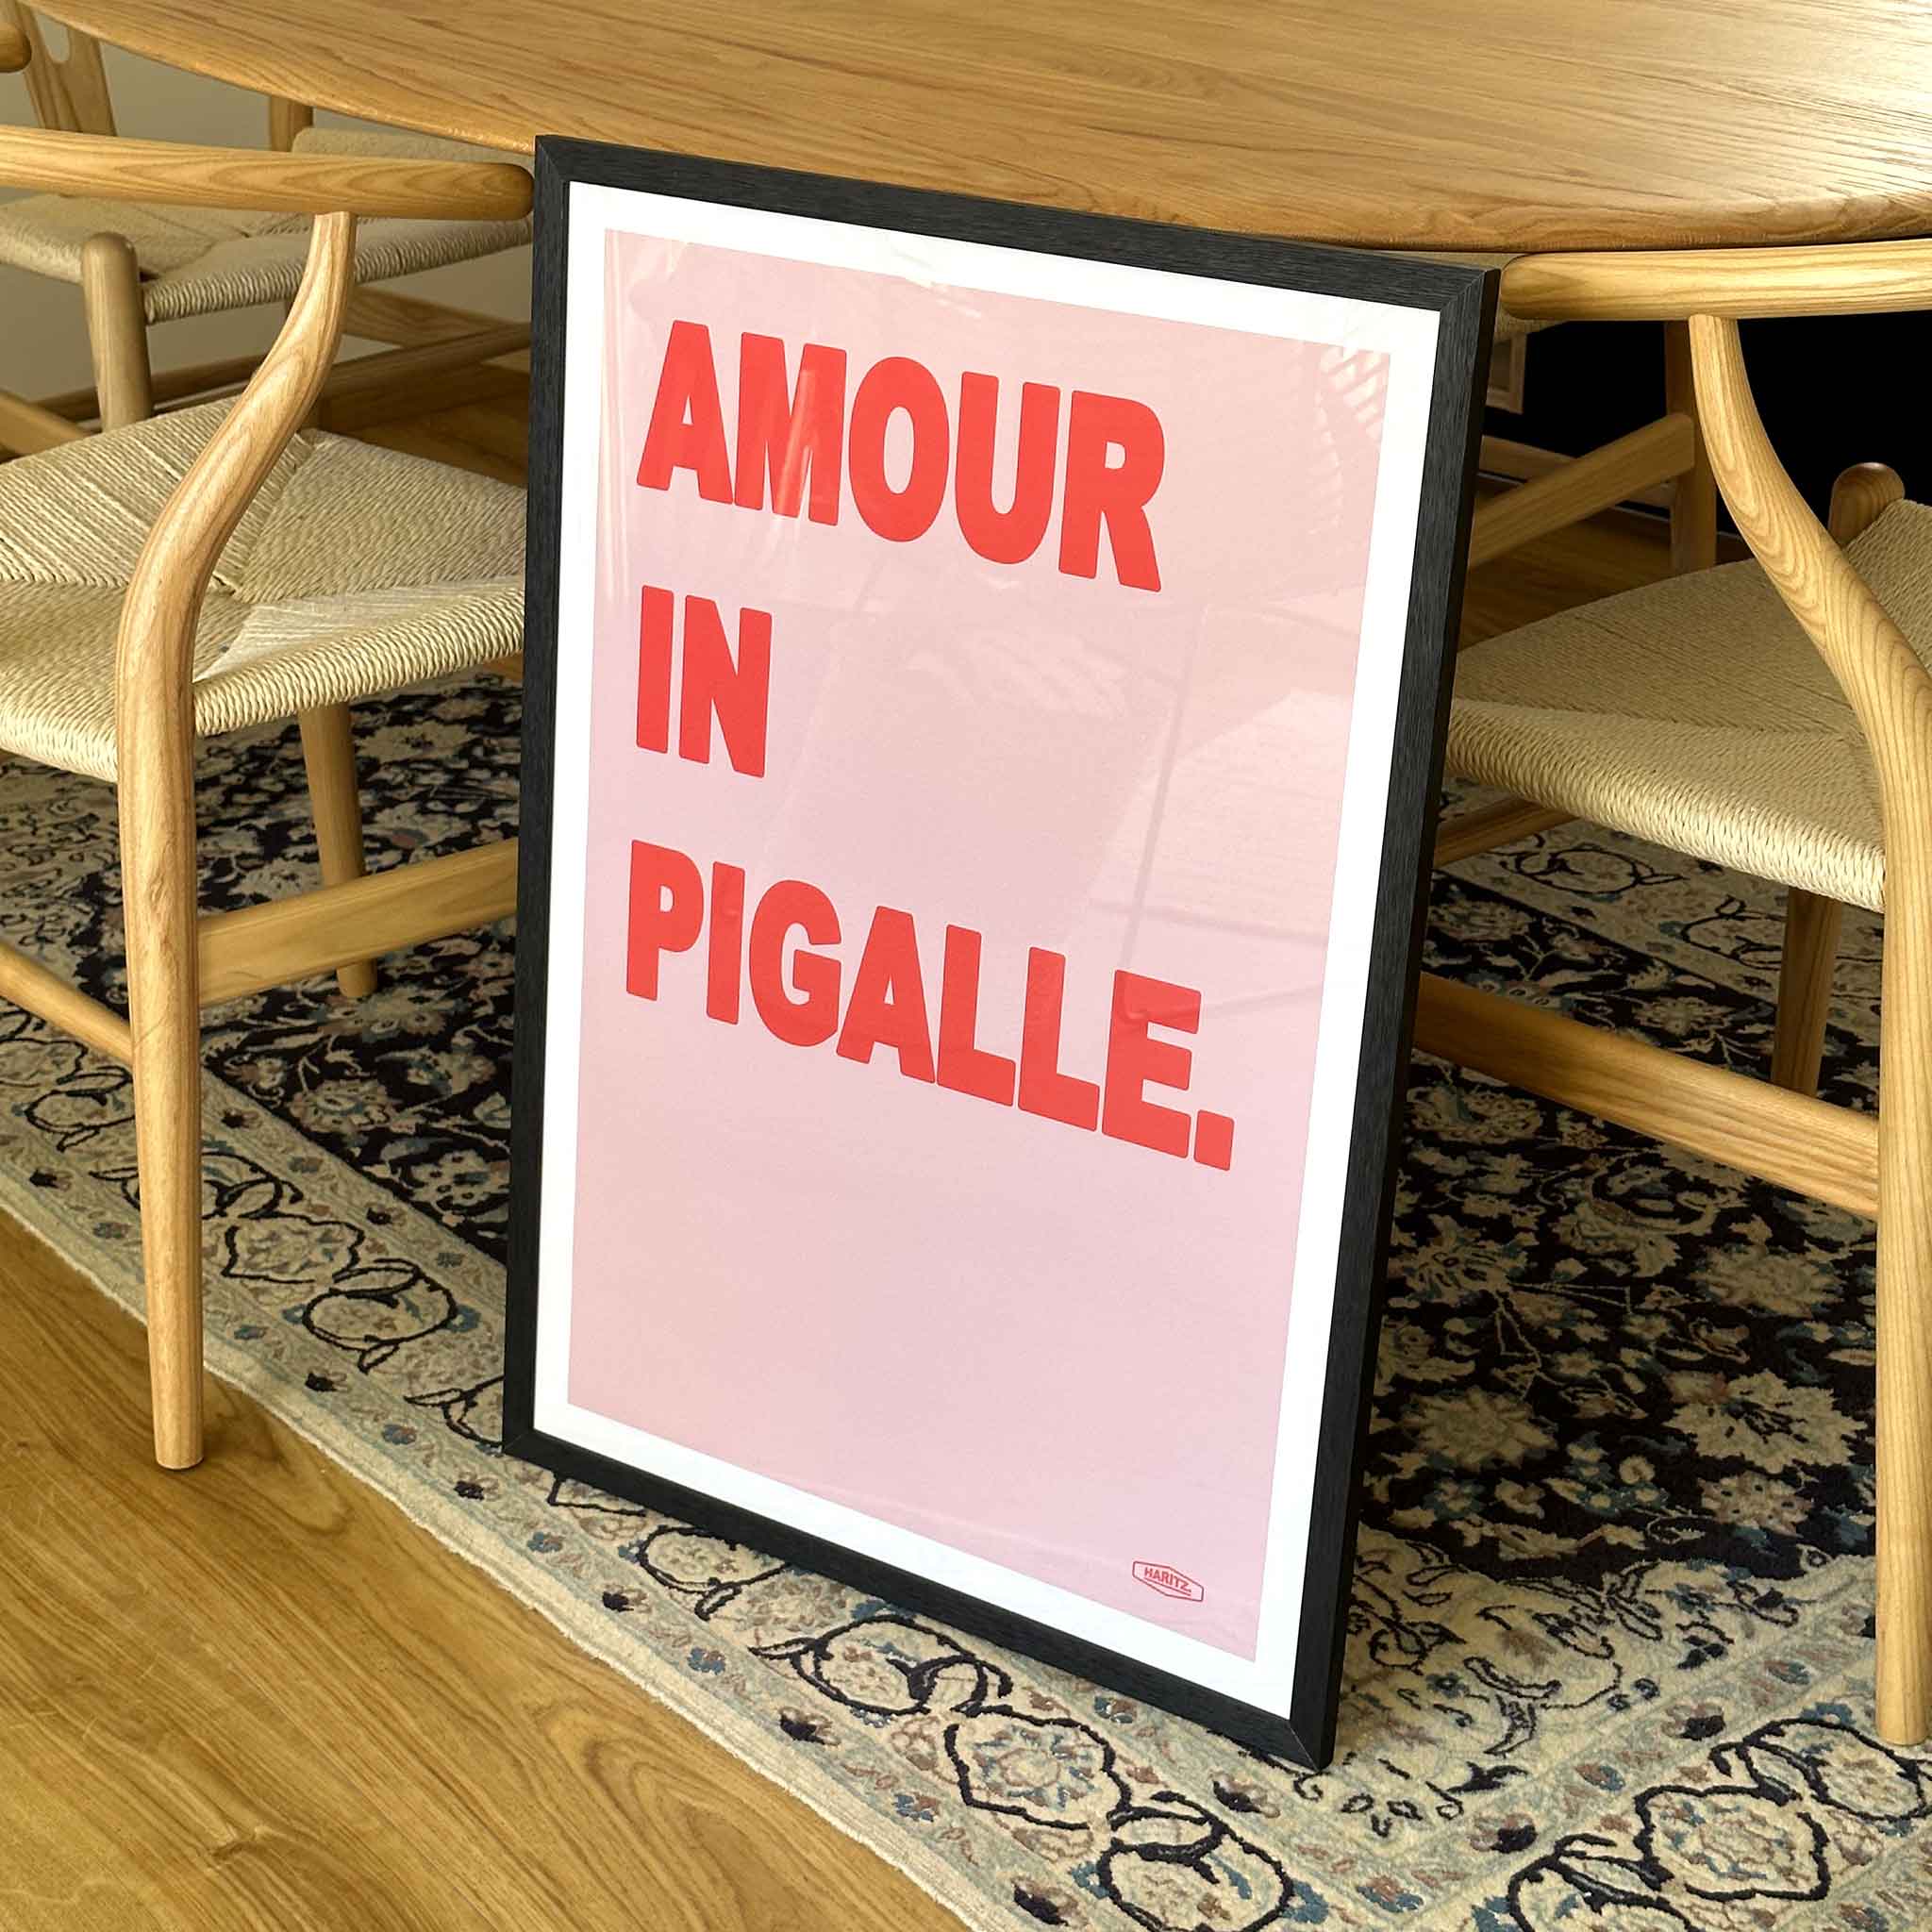 Affiche AMOUR IN PIGALLE